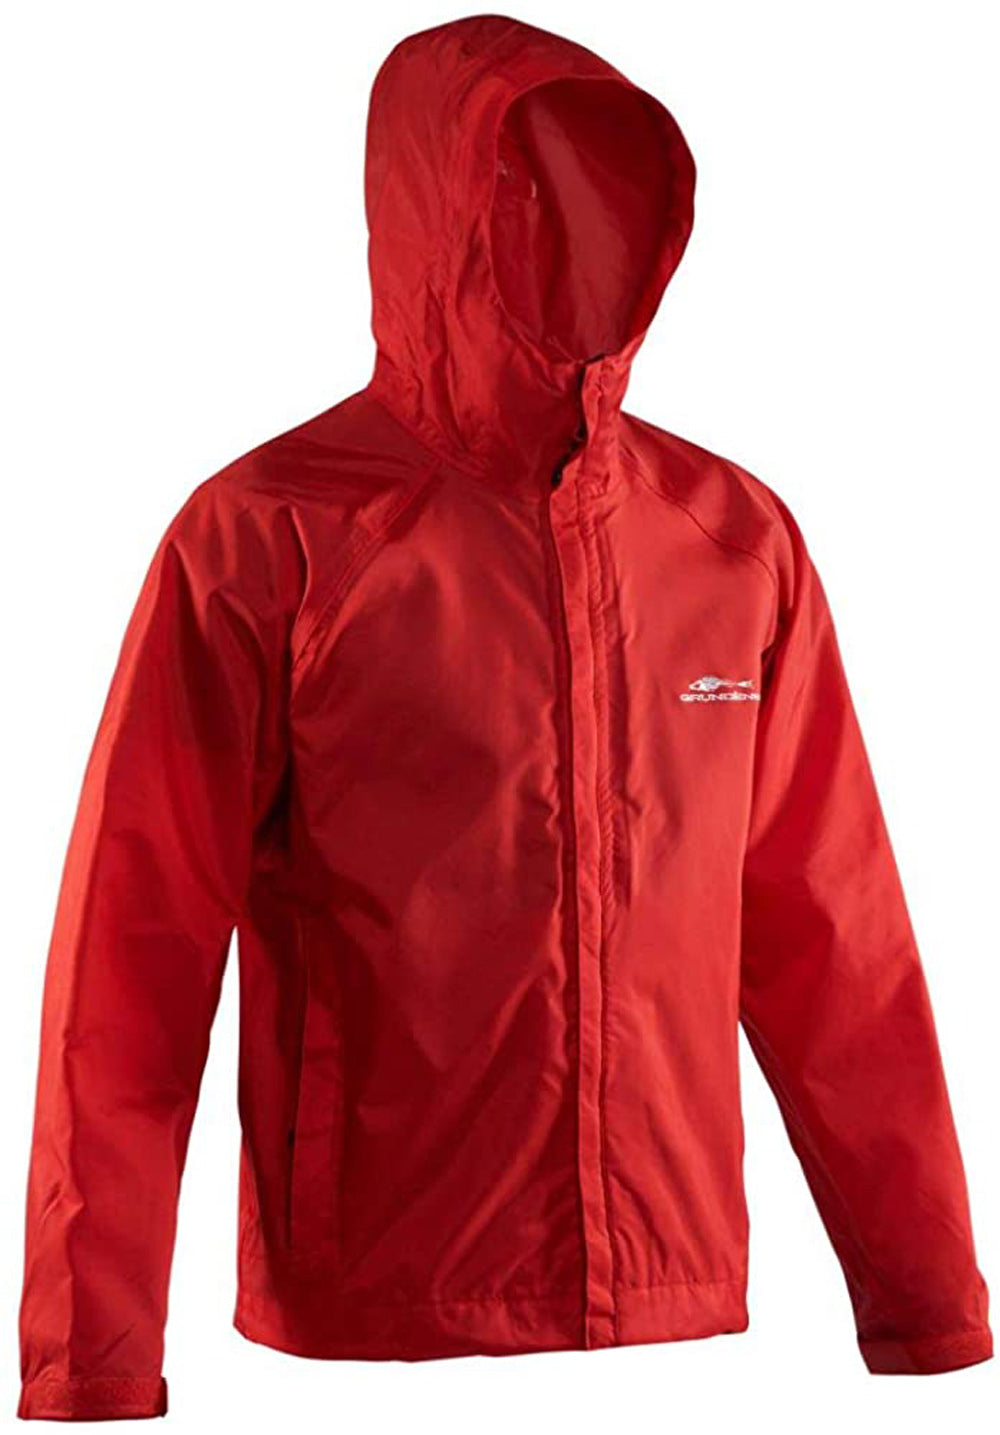 Weather Watch Jacket in Red color from the front view